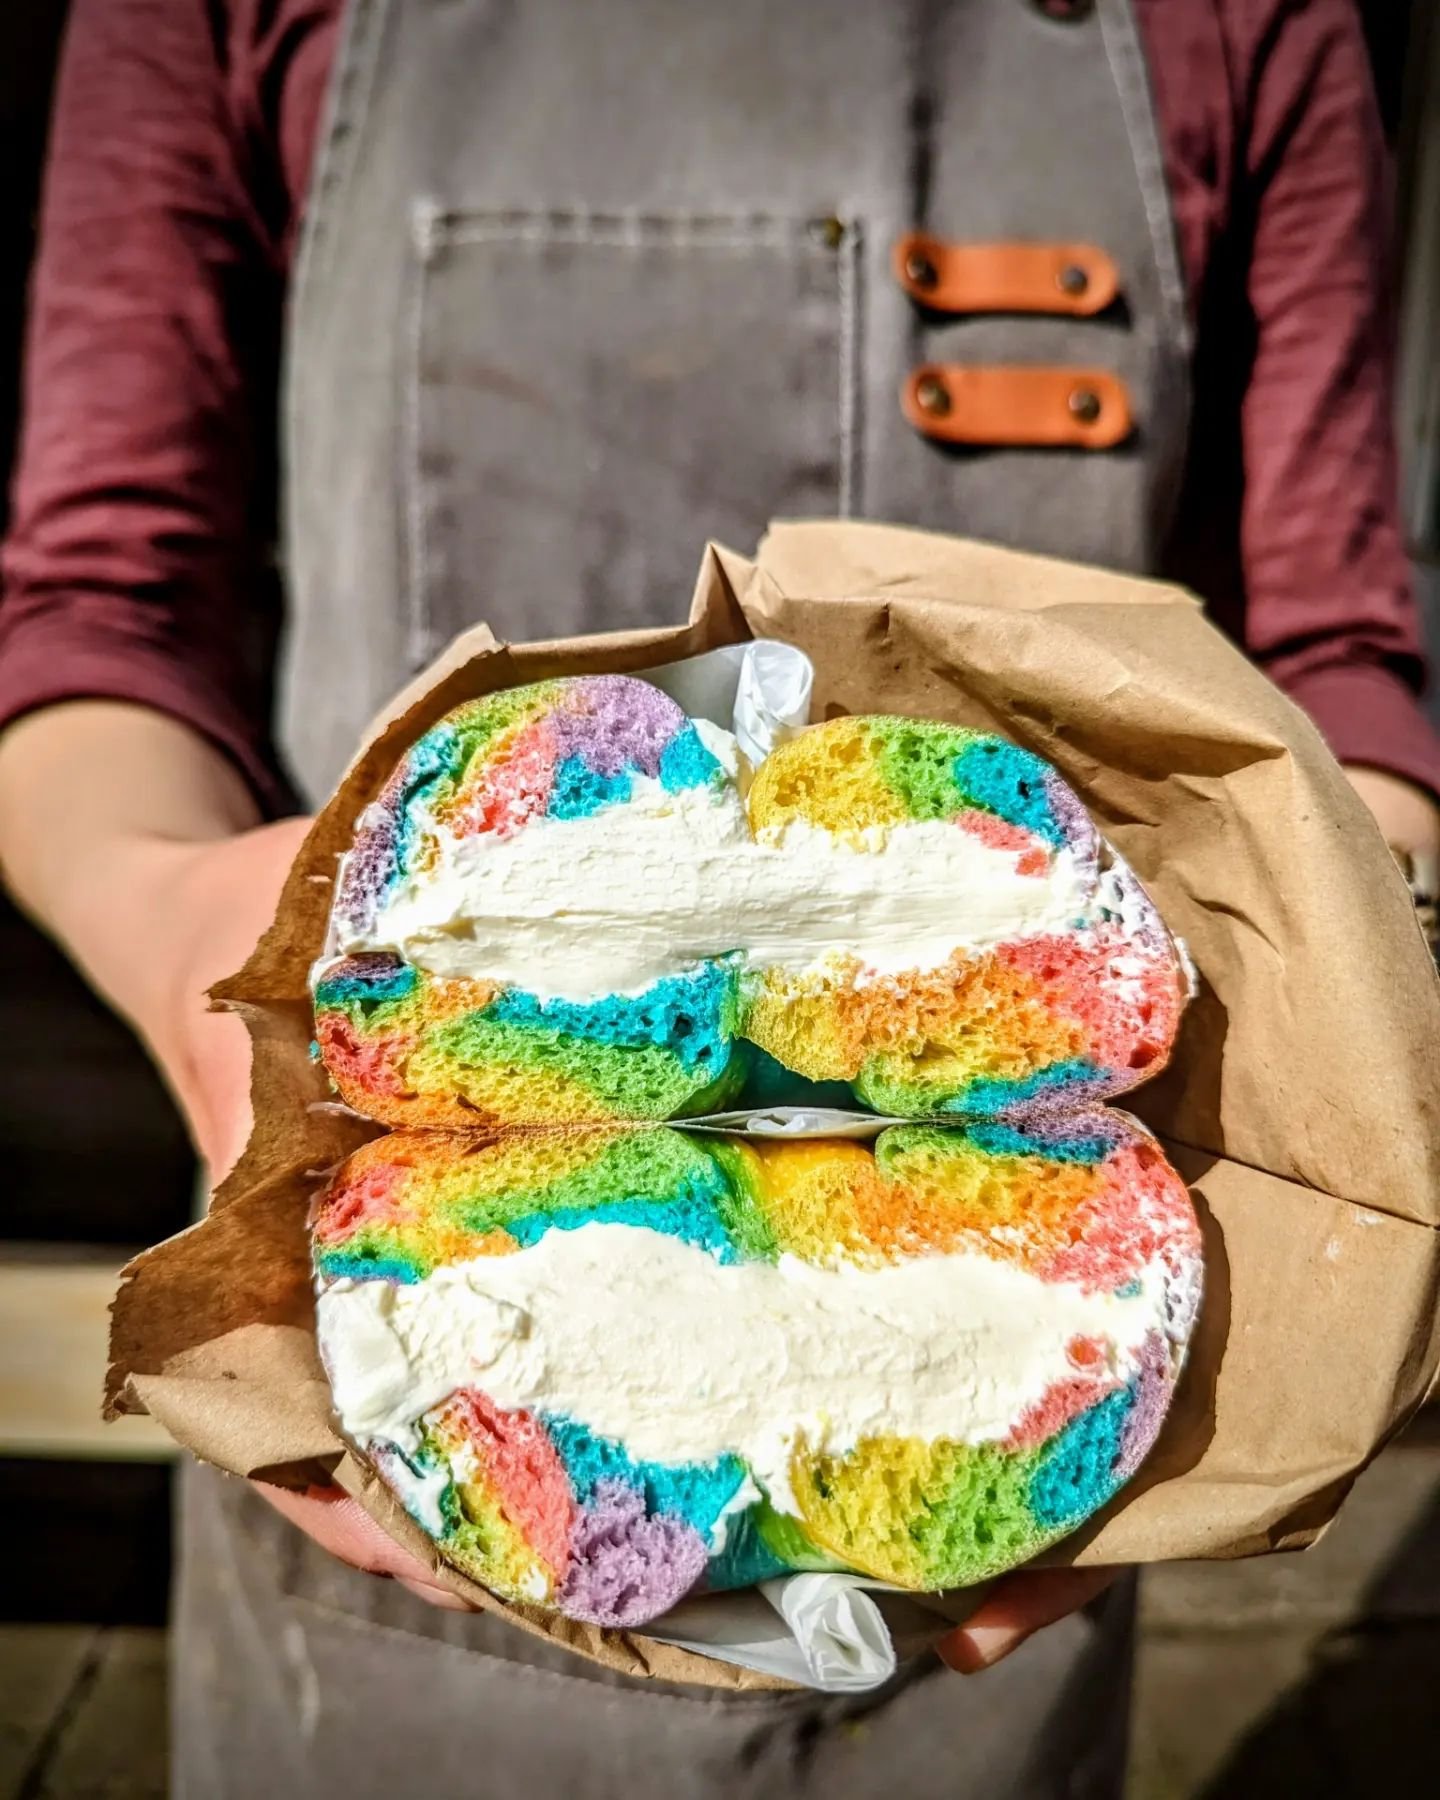 Falmouth Pride! 🏳️&zwj;🌈 Saturday 27 April!!
We're whipping up a special batch of Pride Bagels 🌈, but hurry, they won't last long! Get here early before they're gone! @cornwallpride #FalmouthPride #PrideBagels #corwallpride #pride 🌈🥯